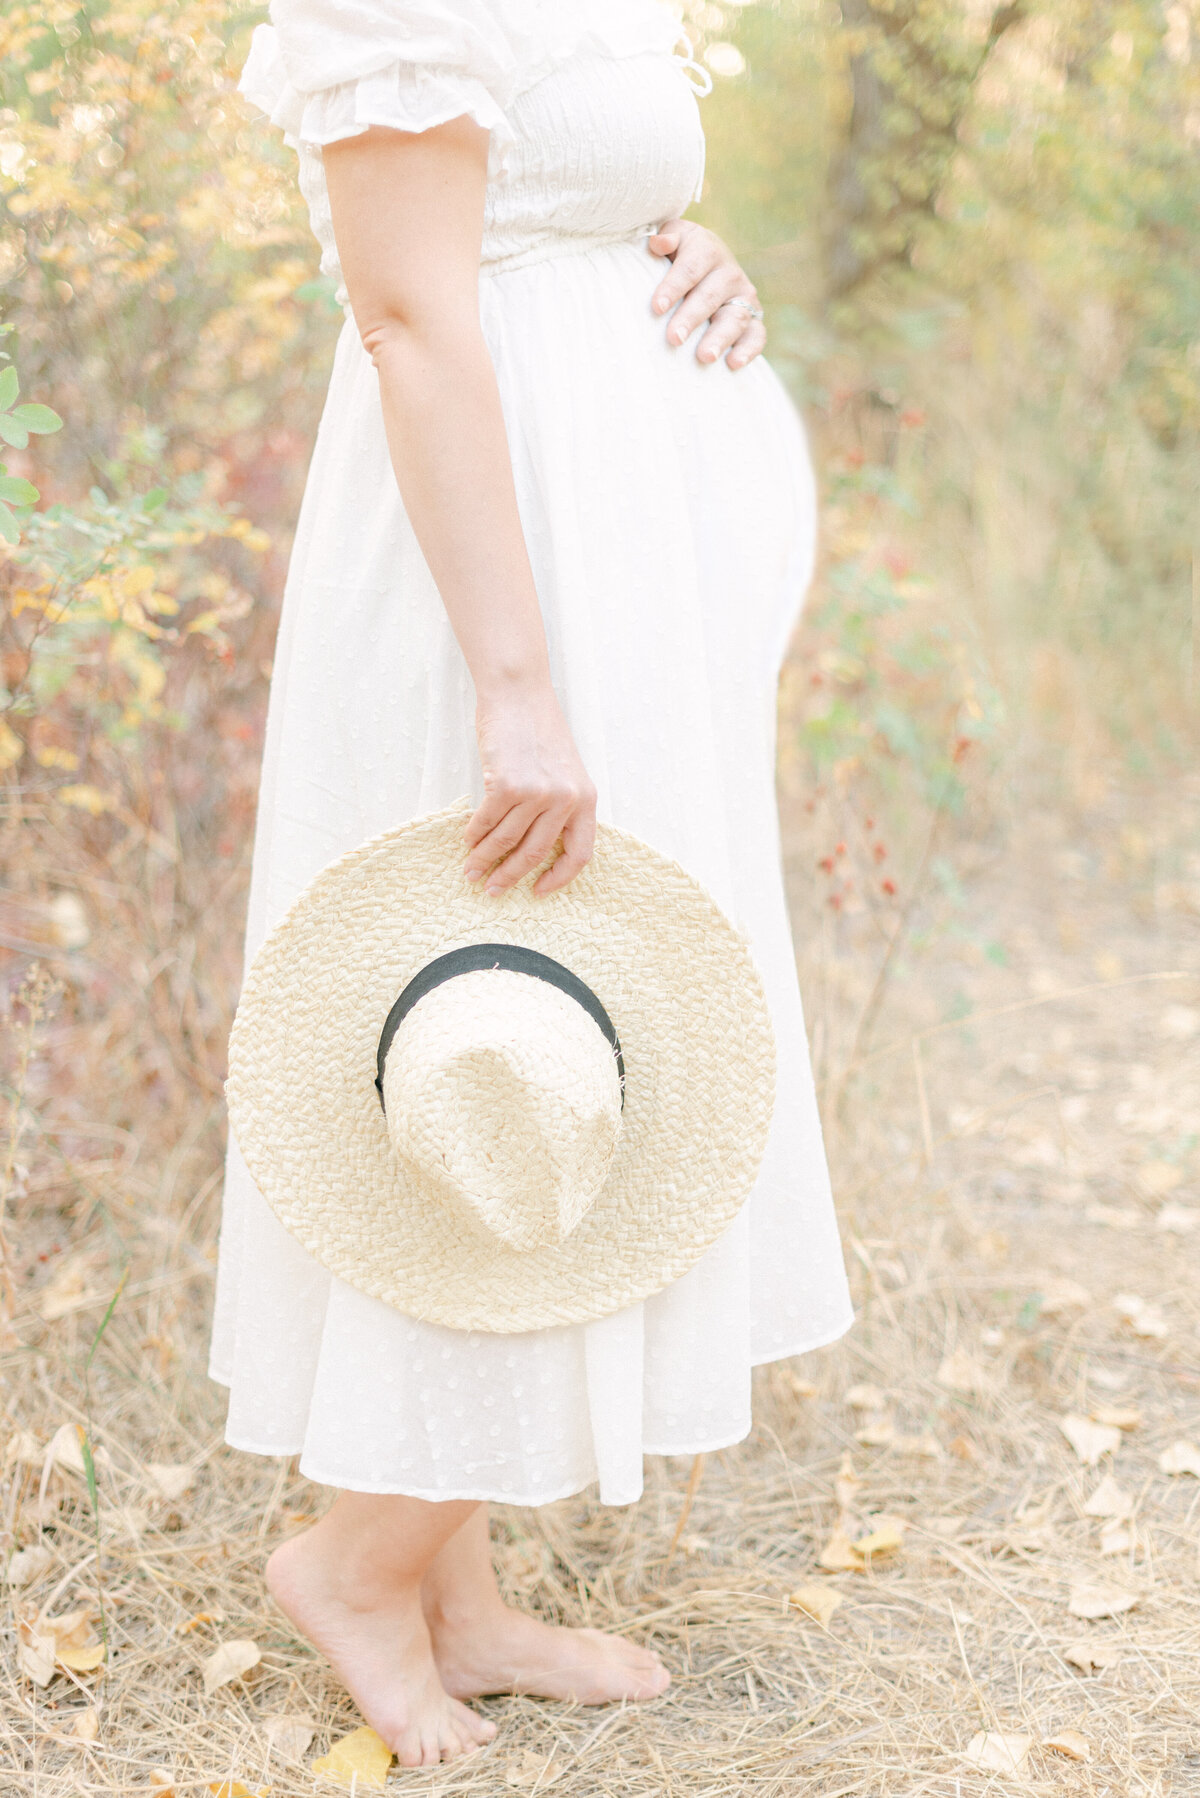 Portrait of a barefoot pregnant woman in a white summer dress with one hand on her belly and holding a hat out in the country